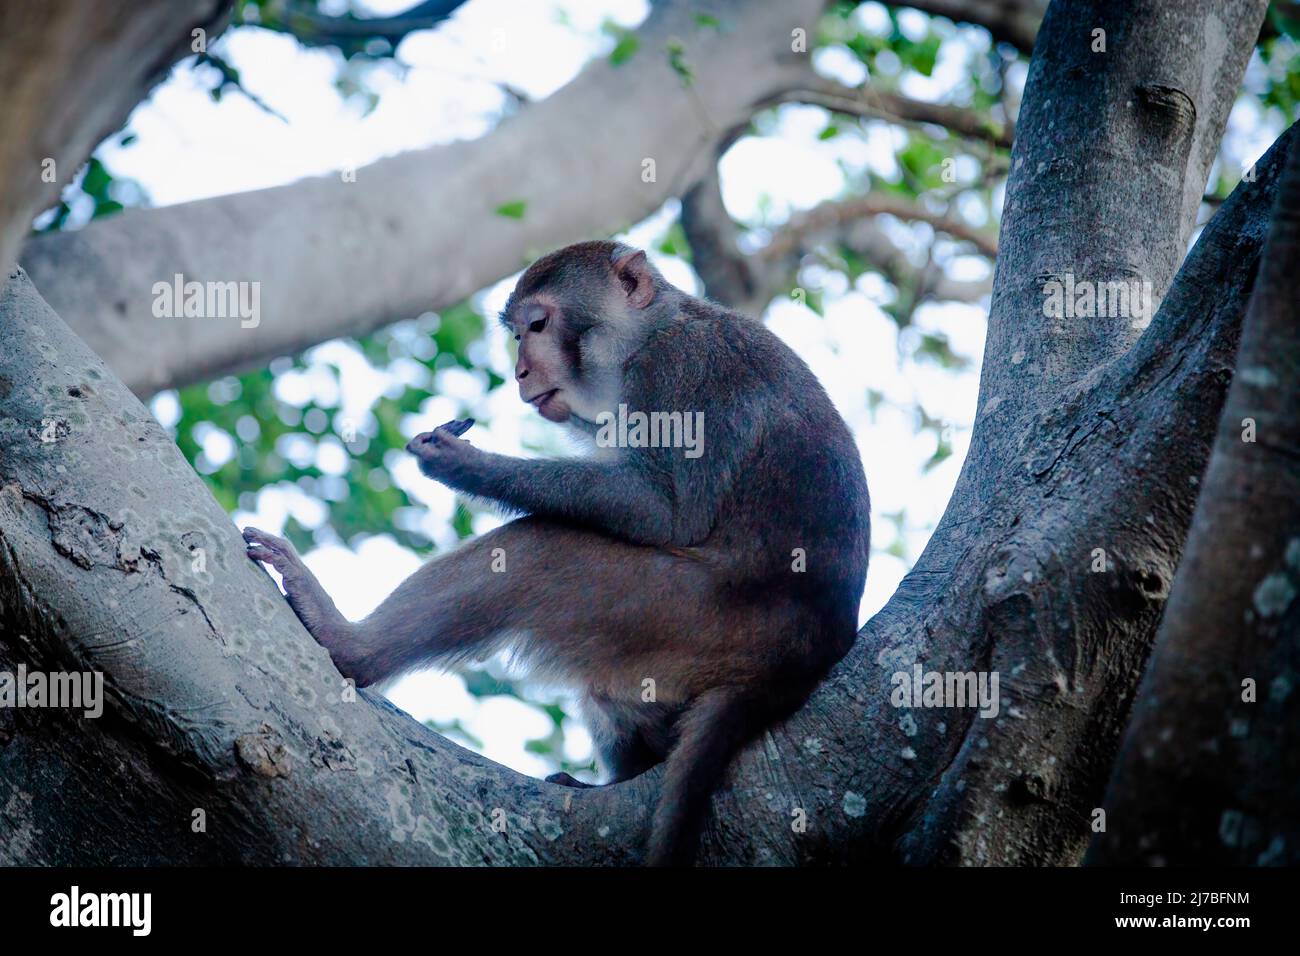 One monkey sitting on a tree branch at Hua Linh Ung Buddhist Temple on Monkey Mountain, Da Nang, VN Stock Photo